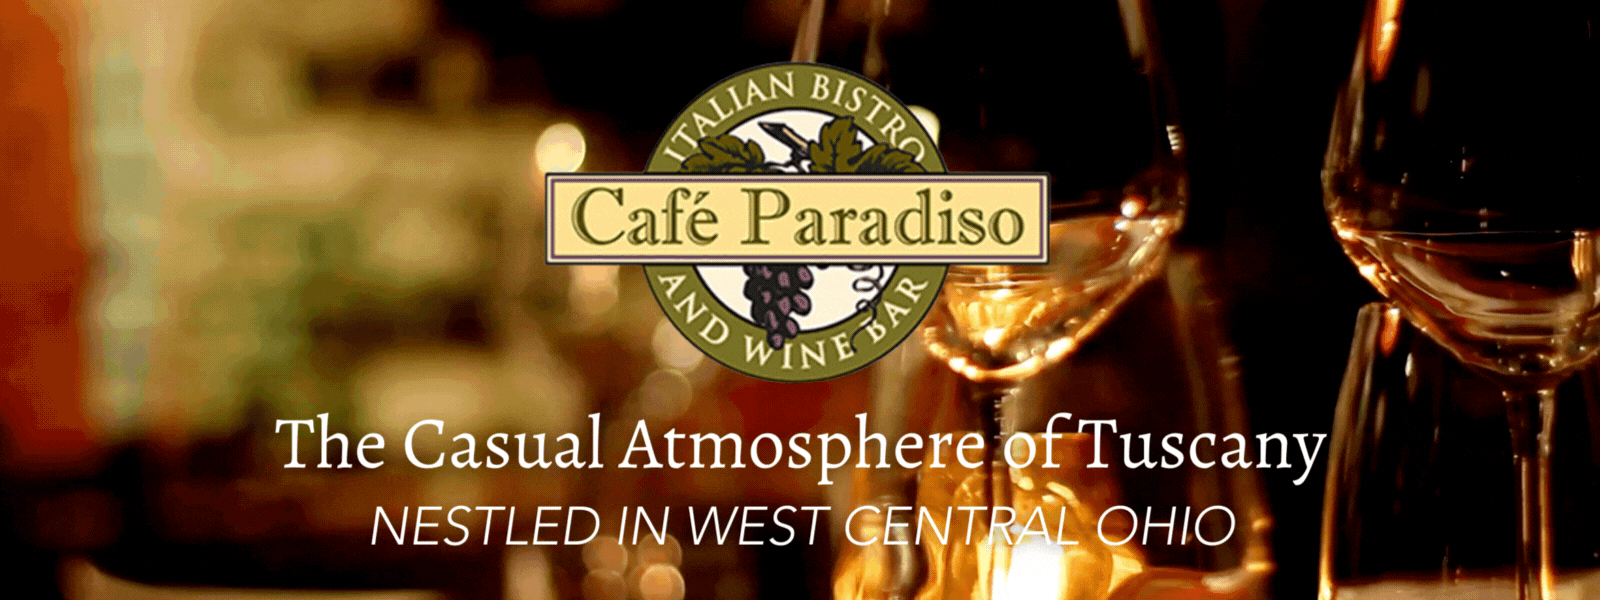 Cafe Paradiso - The Casual Atmosphere of Tuscany Nestled in West Central Ohio